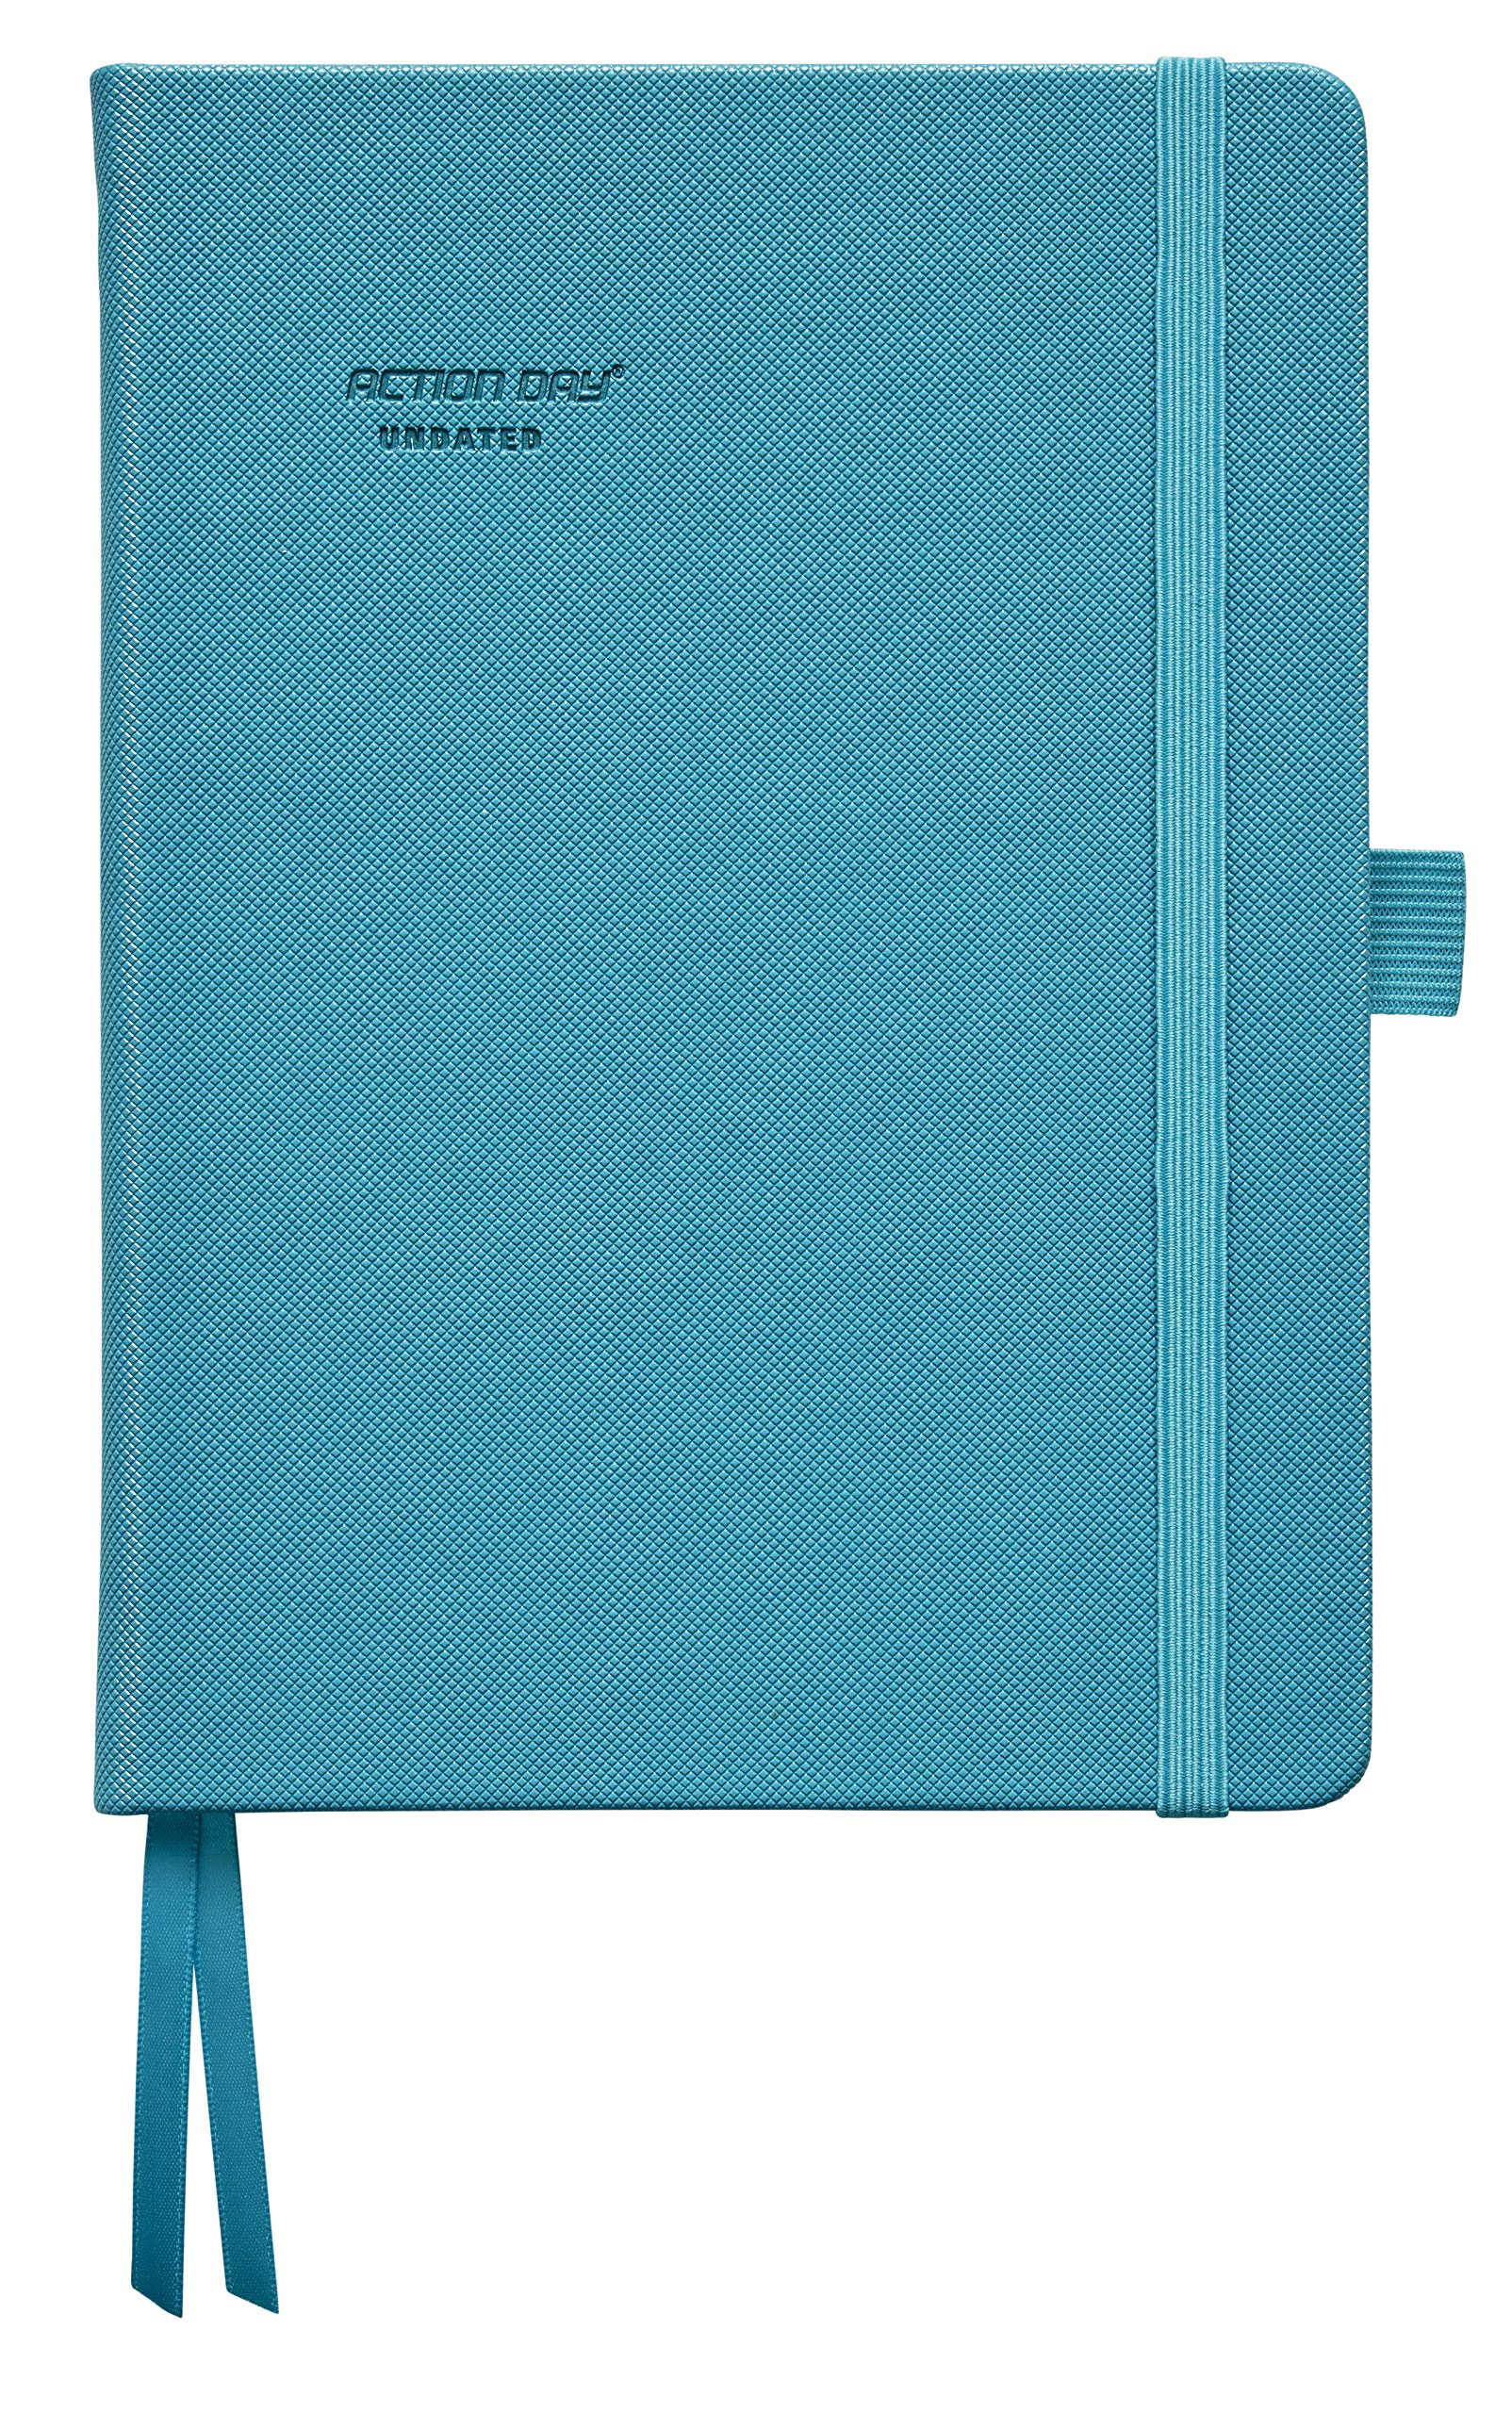 Action Day Undated Weekly Productivity Planner With To-Do List,Goal Setting & Action Planning for Your Life,Work & Home - Size 6x8 - Turquoise